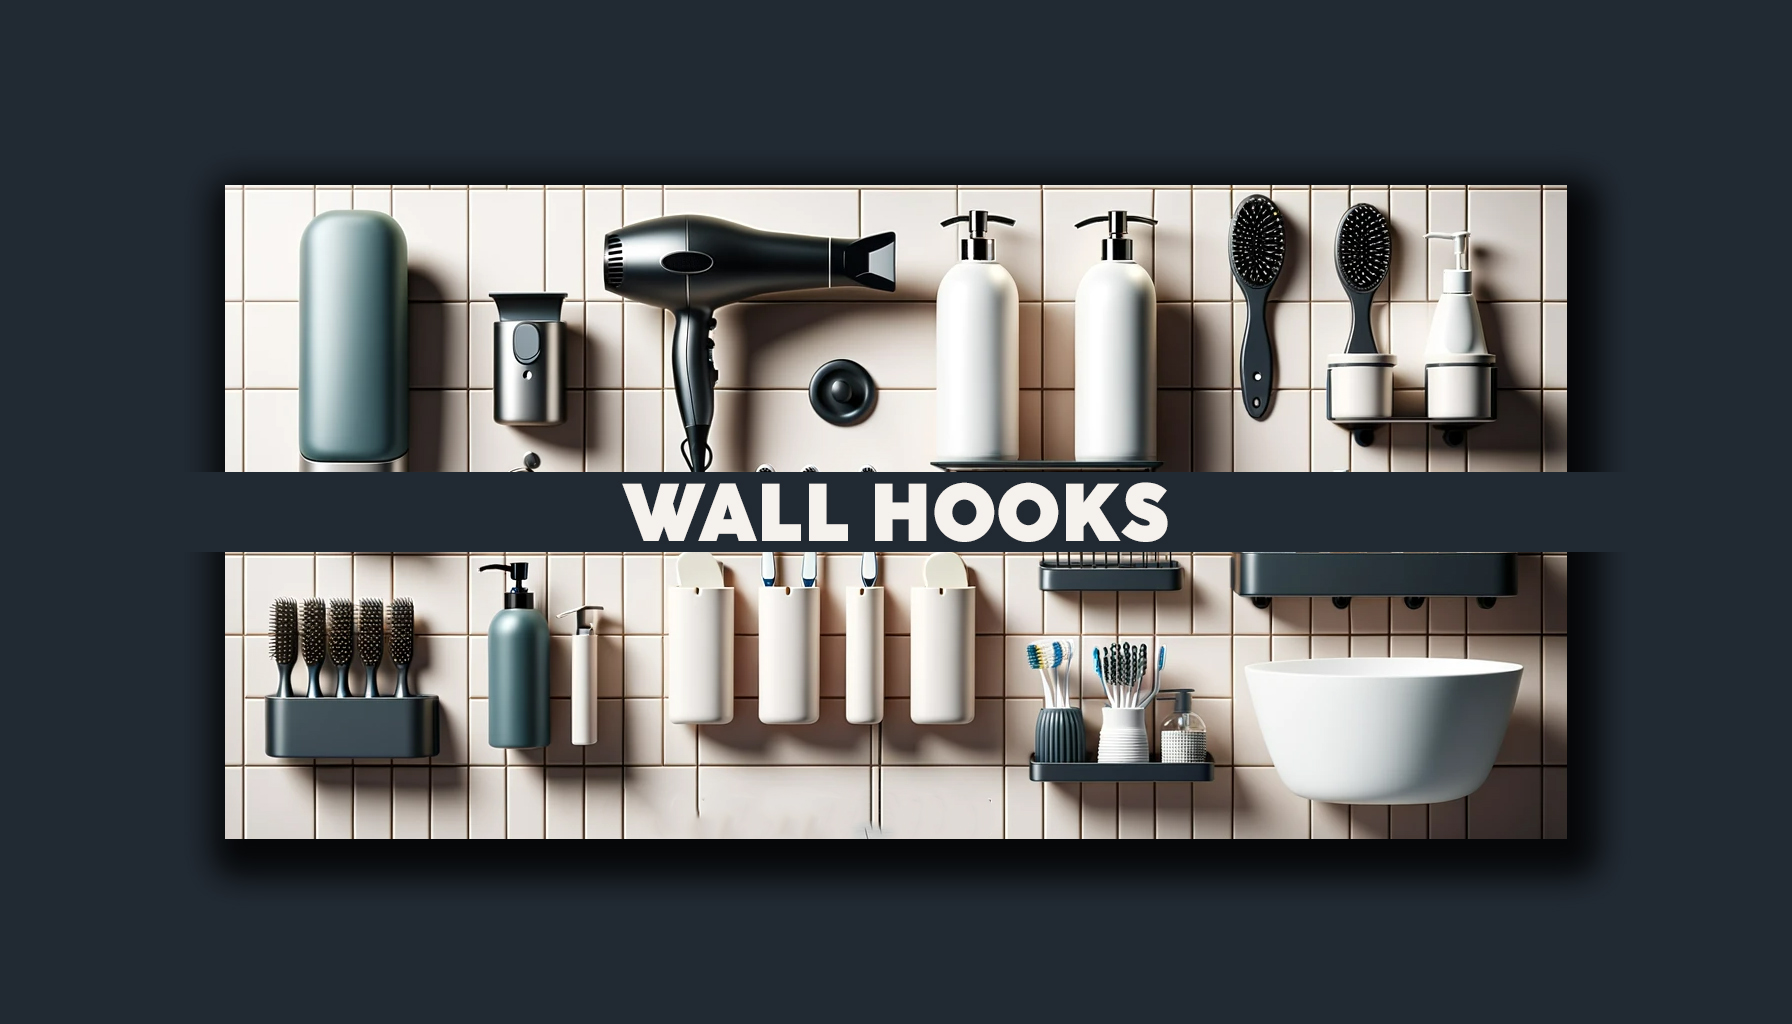 Transform your space with our elegant collection of Wall Hooks. Perfect for adding a touch of style while maximizing functionality